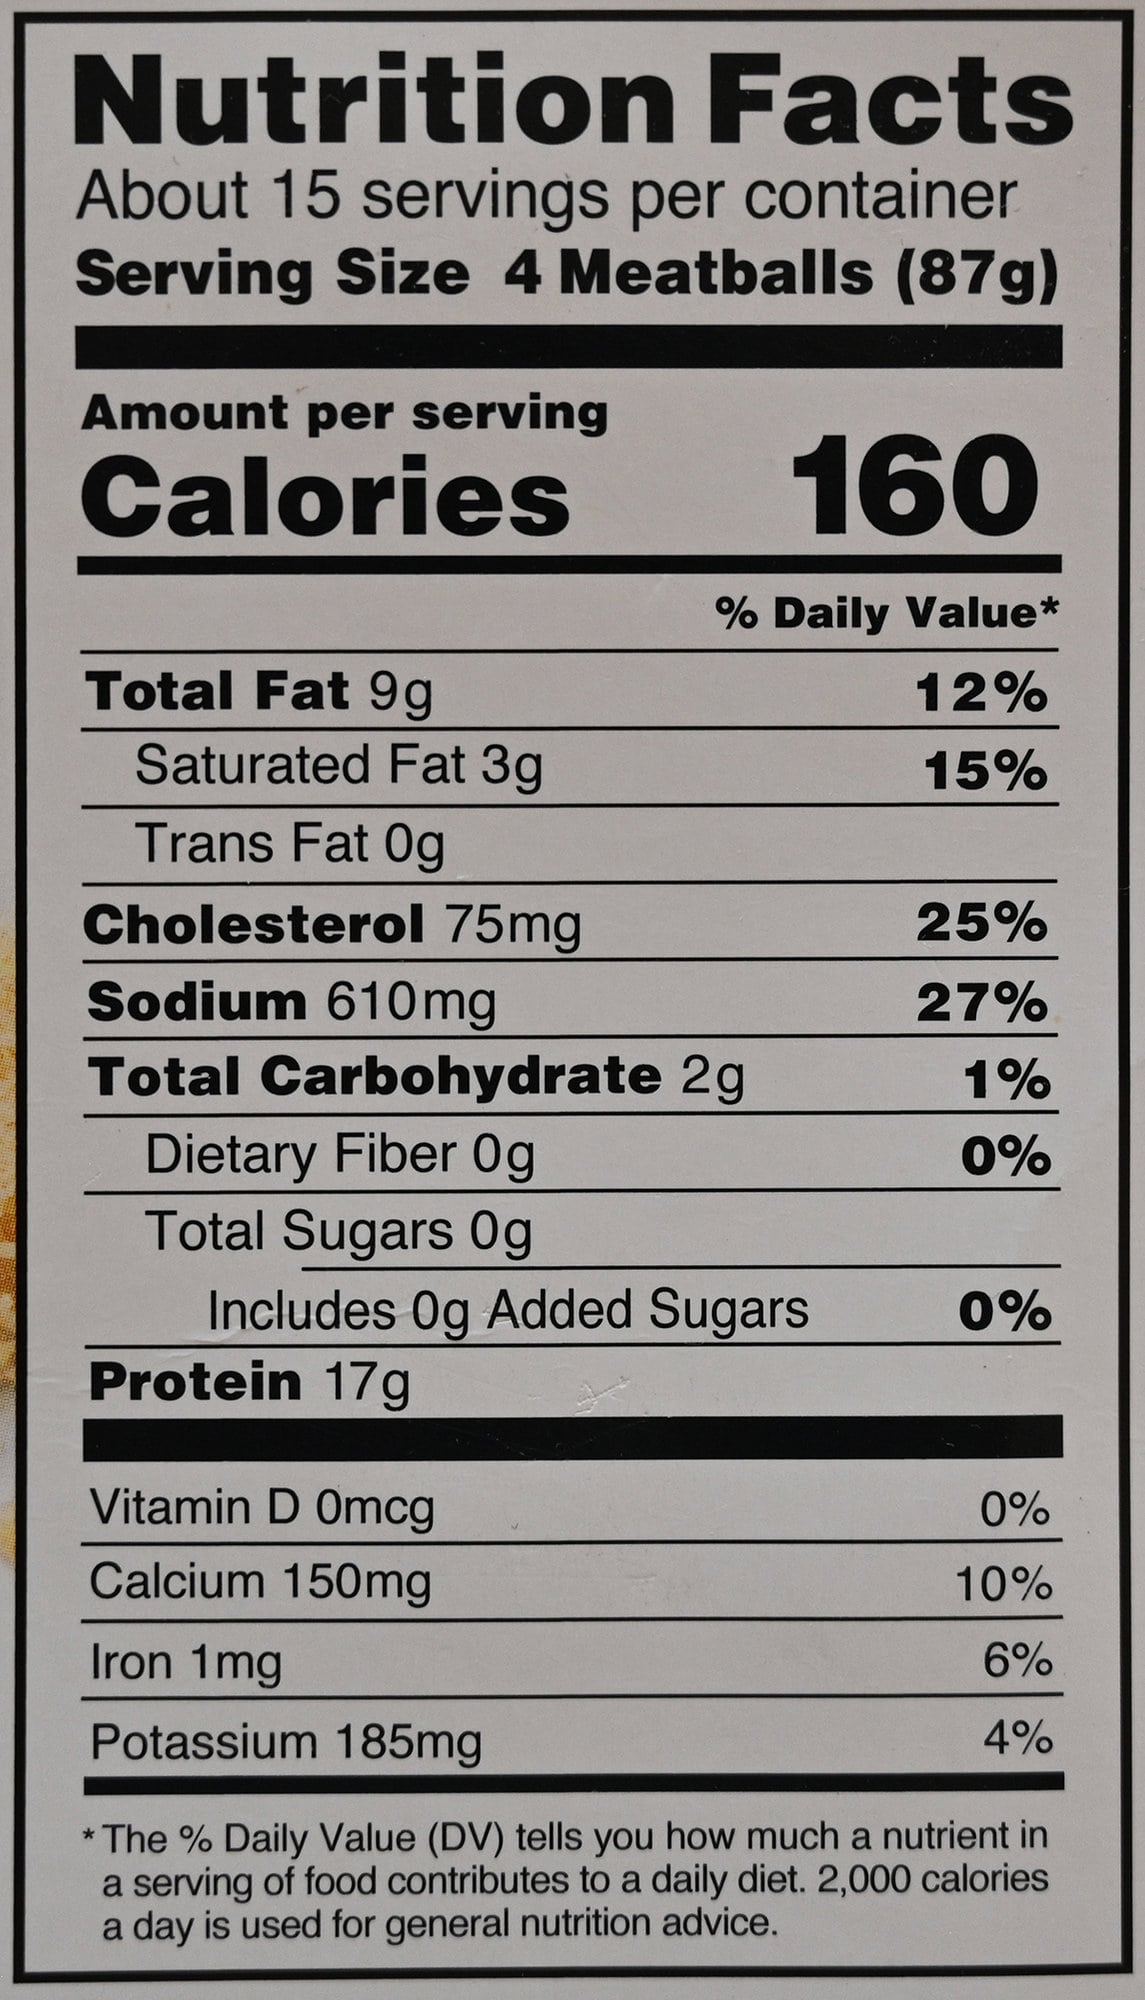 Image of the nutrition facts for the meatballs from the back of the package.